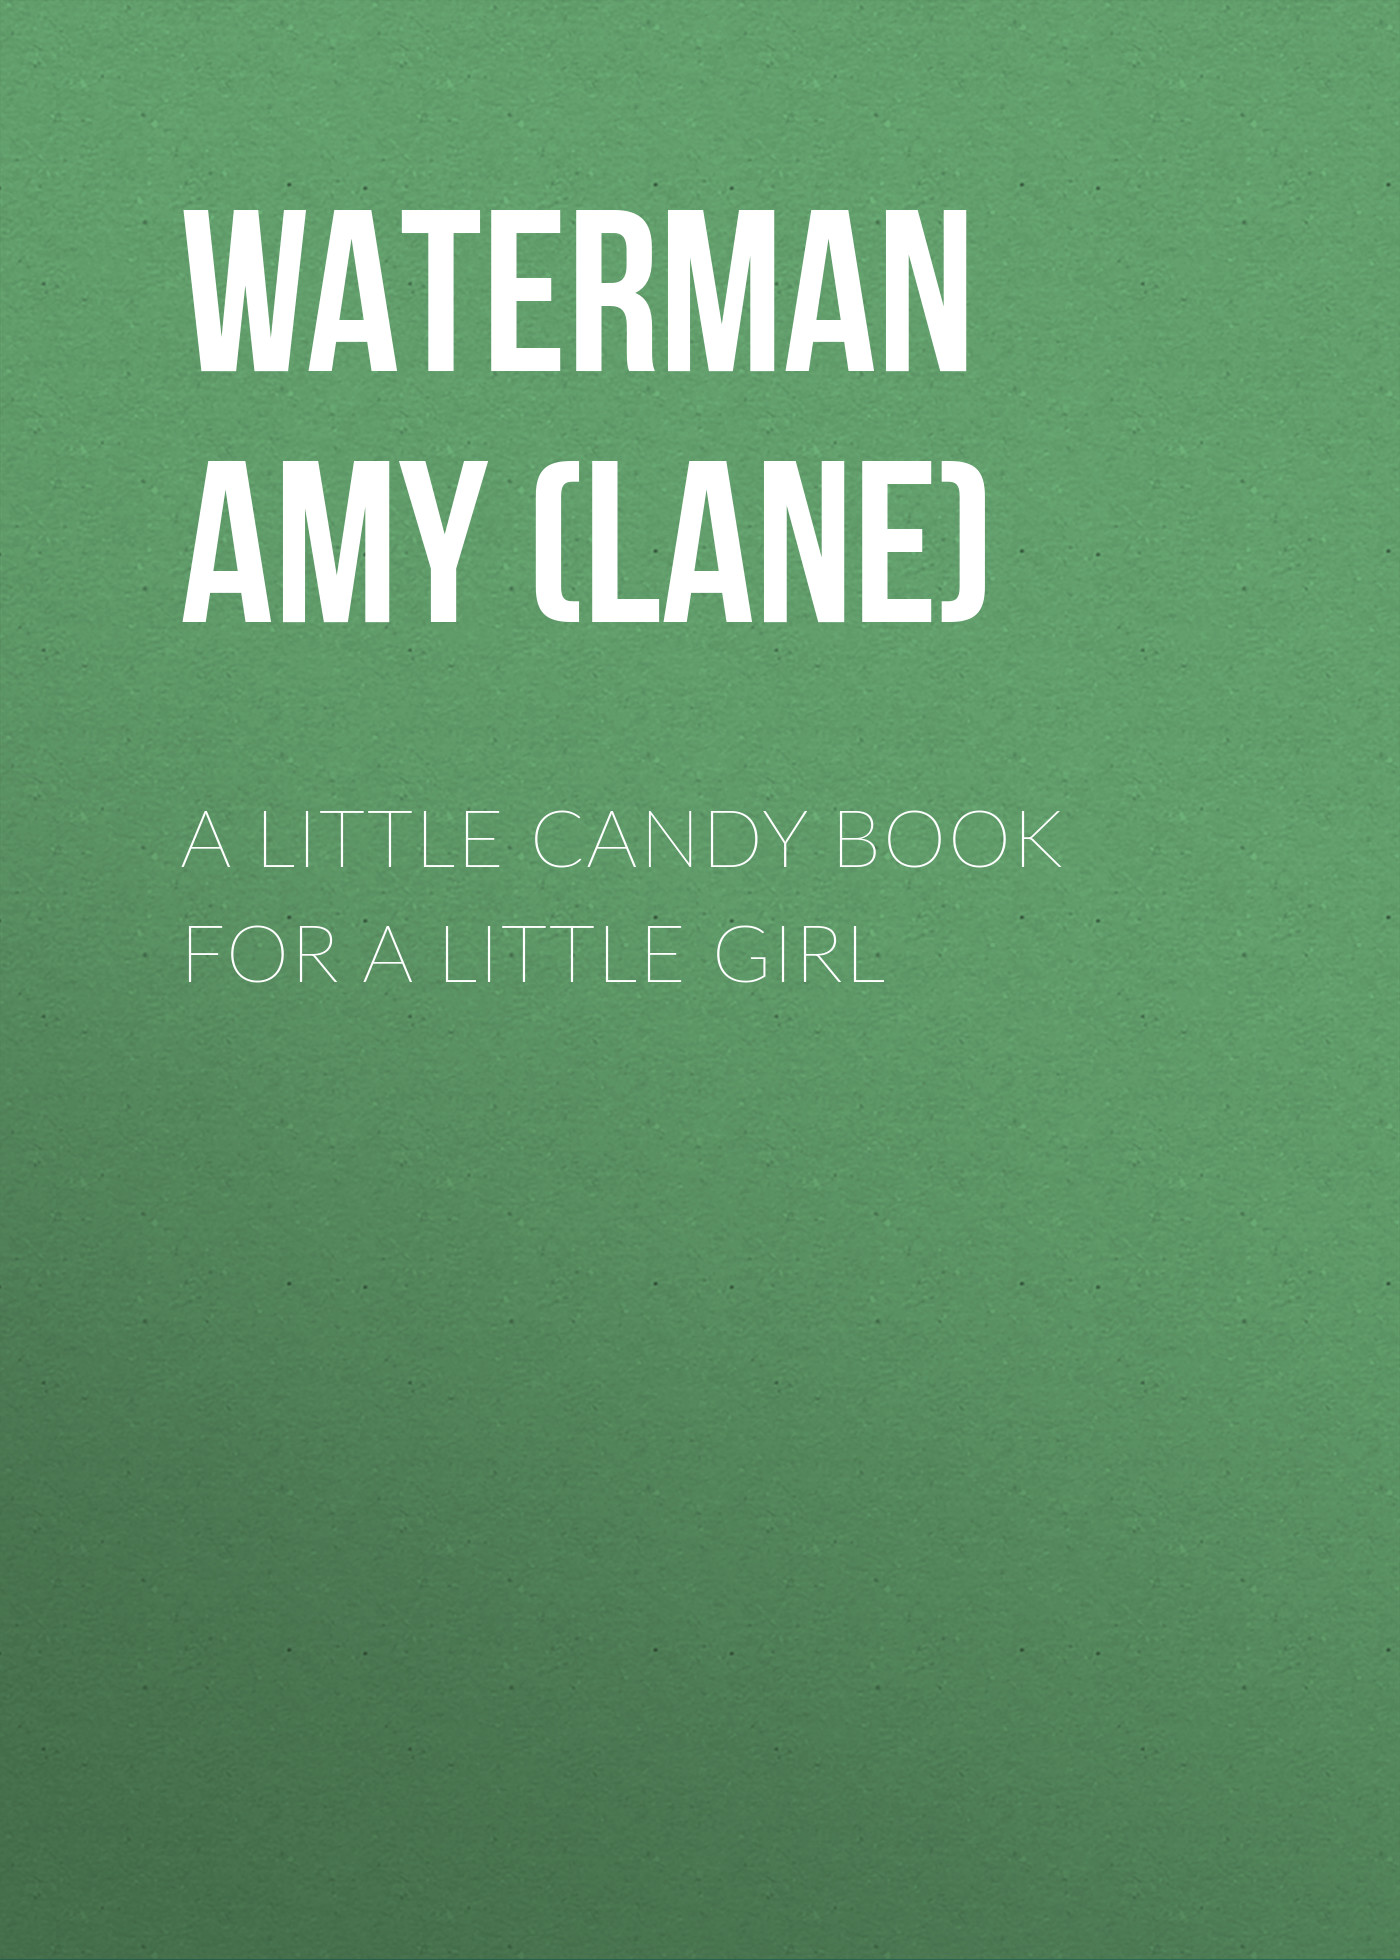 Waterman Amy Harlow (Lane) A Little Candy Book for a Little Girl